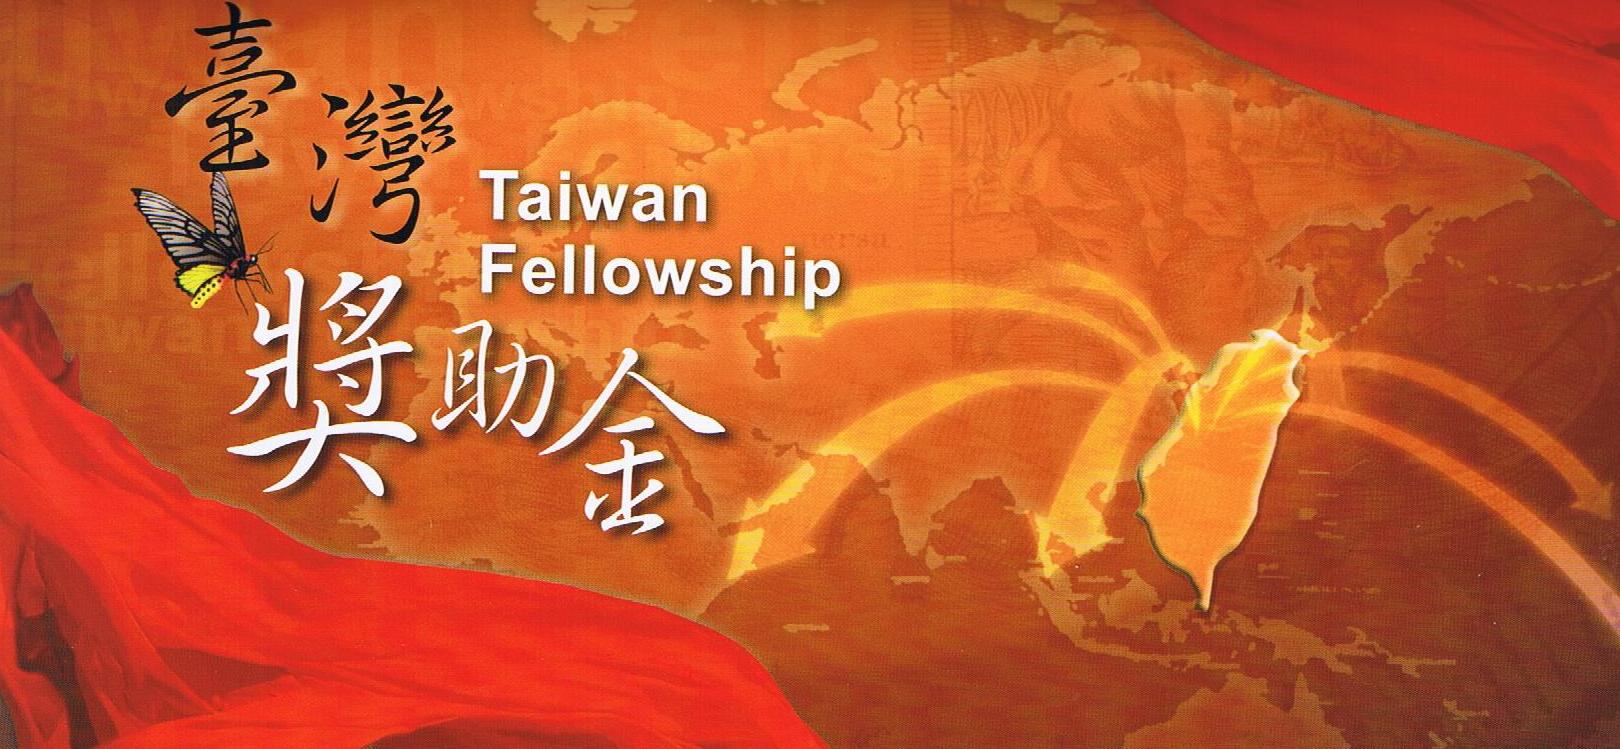 Ministry of Foreign Affairs (MOFA) Taiwan Fellowship 2019 for Scientists (Financing readily available)